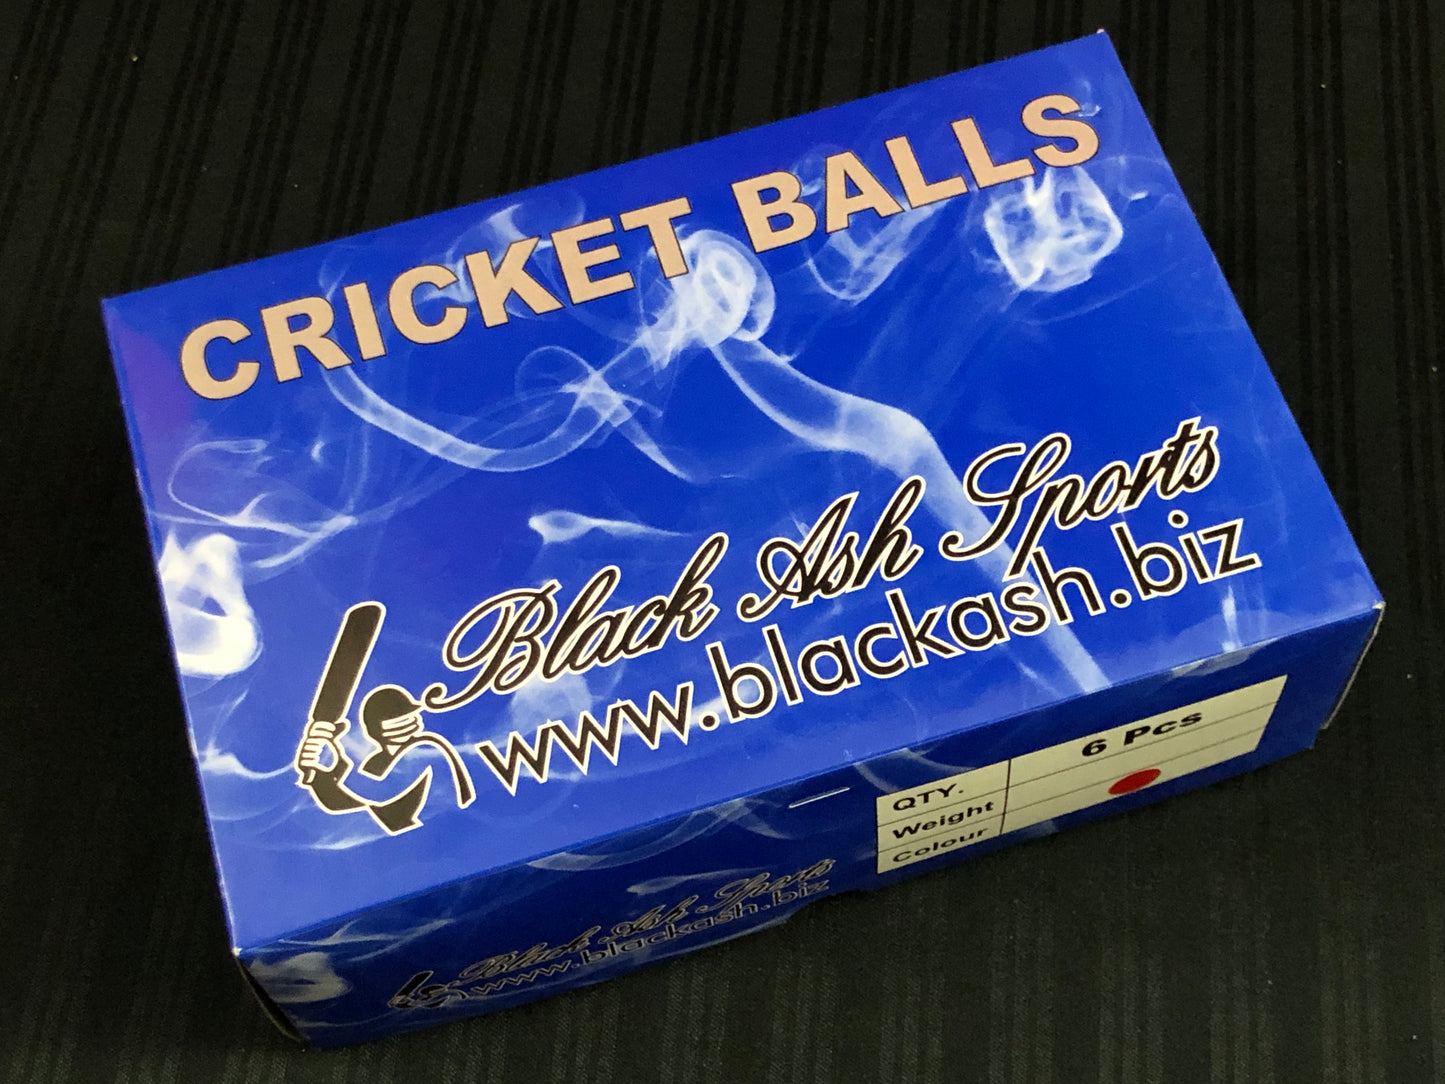 Pack of 6 Black Ash soft cricket training balls in red color, each weighing 90 grams, made of top-quality PVC with a soft center inside. Recommended for coaching and training purposes, suitable for both indoor and outdoor cricket play.